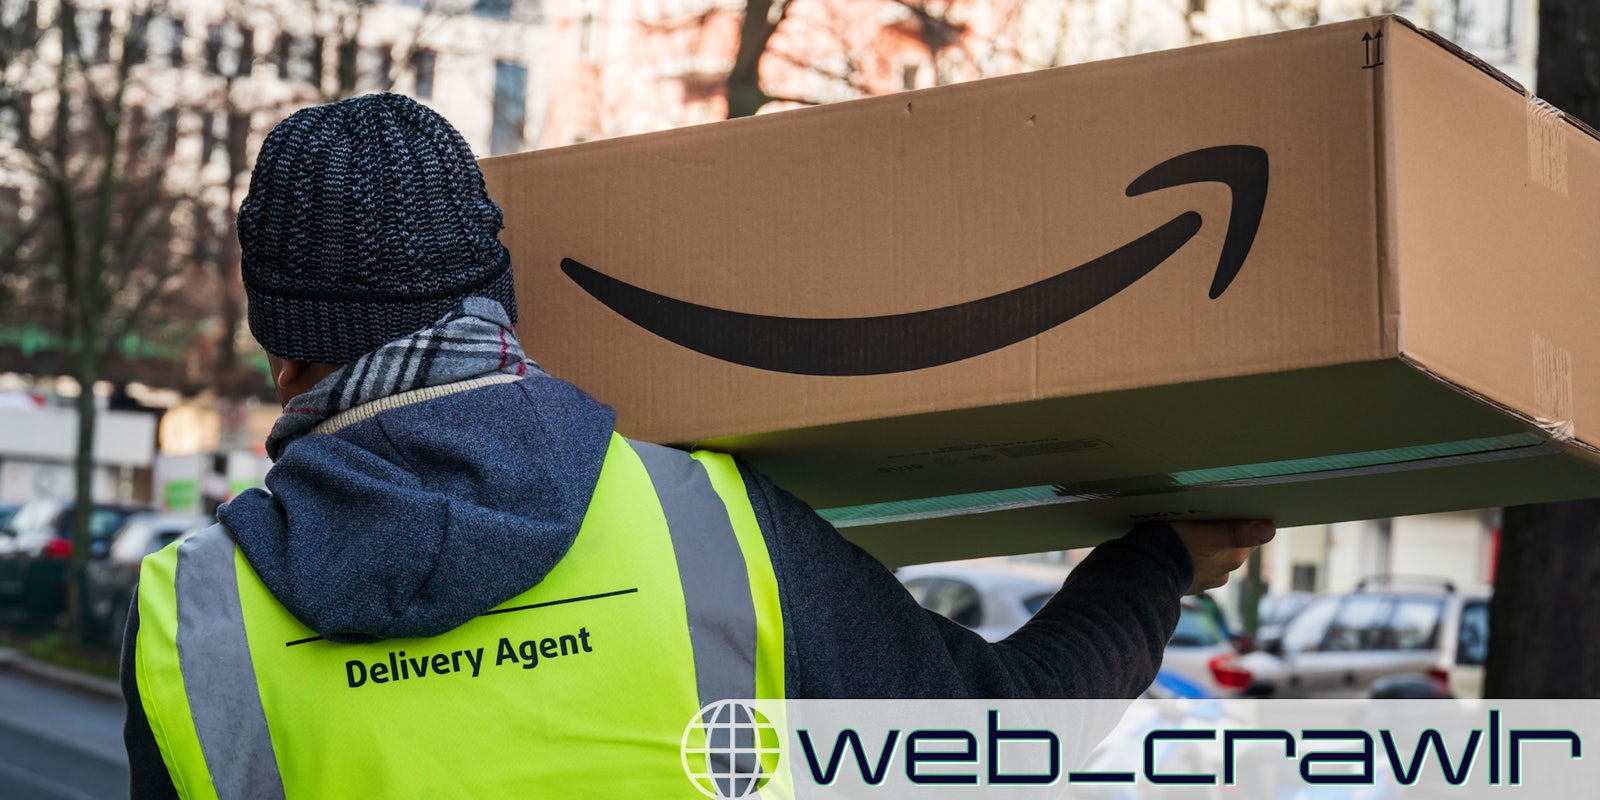 An Amazon worker holding a package. The Daily Dot newsletter web_crawlr logo is in the bottom right corner.